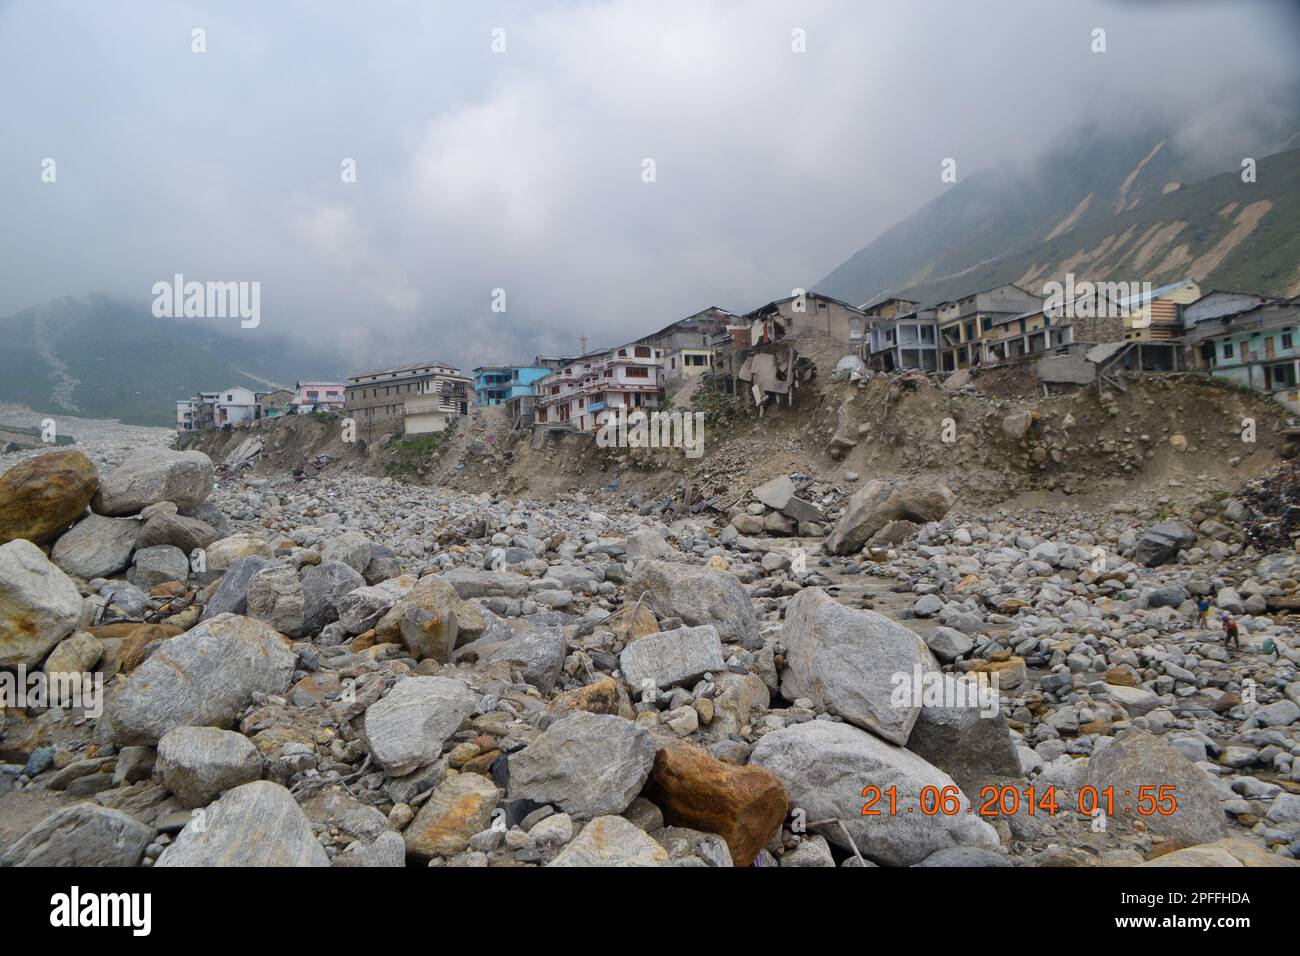 Damaged buildings in Kedarnath disaster June 2013. In June 2013, a multi-day cloudburst centered on the North Indian state of Uttarakhand caused devas Stock Photo